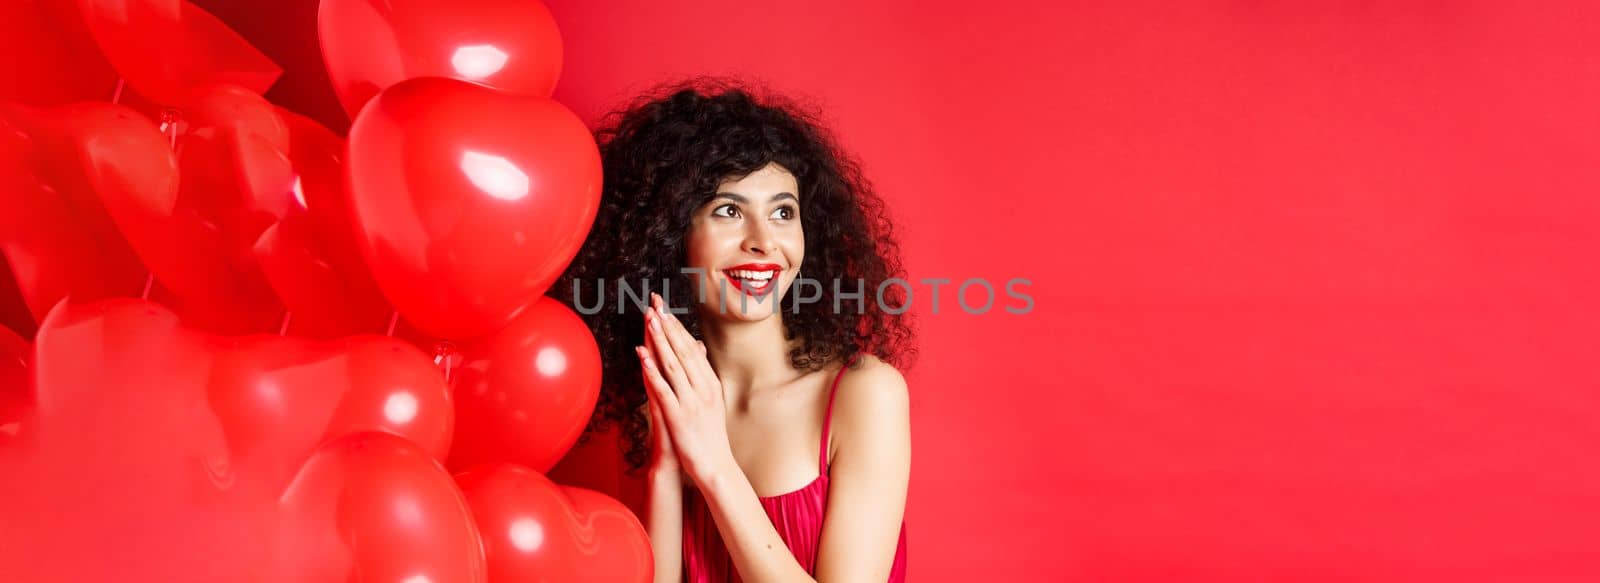 Excited beautiful woman with curly hair, standing near heart balloons and rubbing palms together, expect good deal or relish, red background.